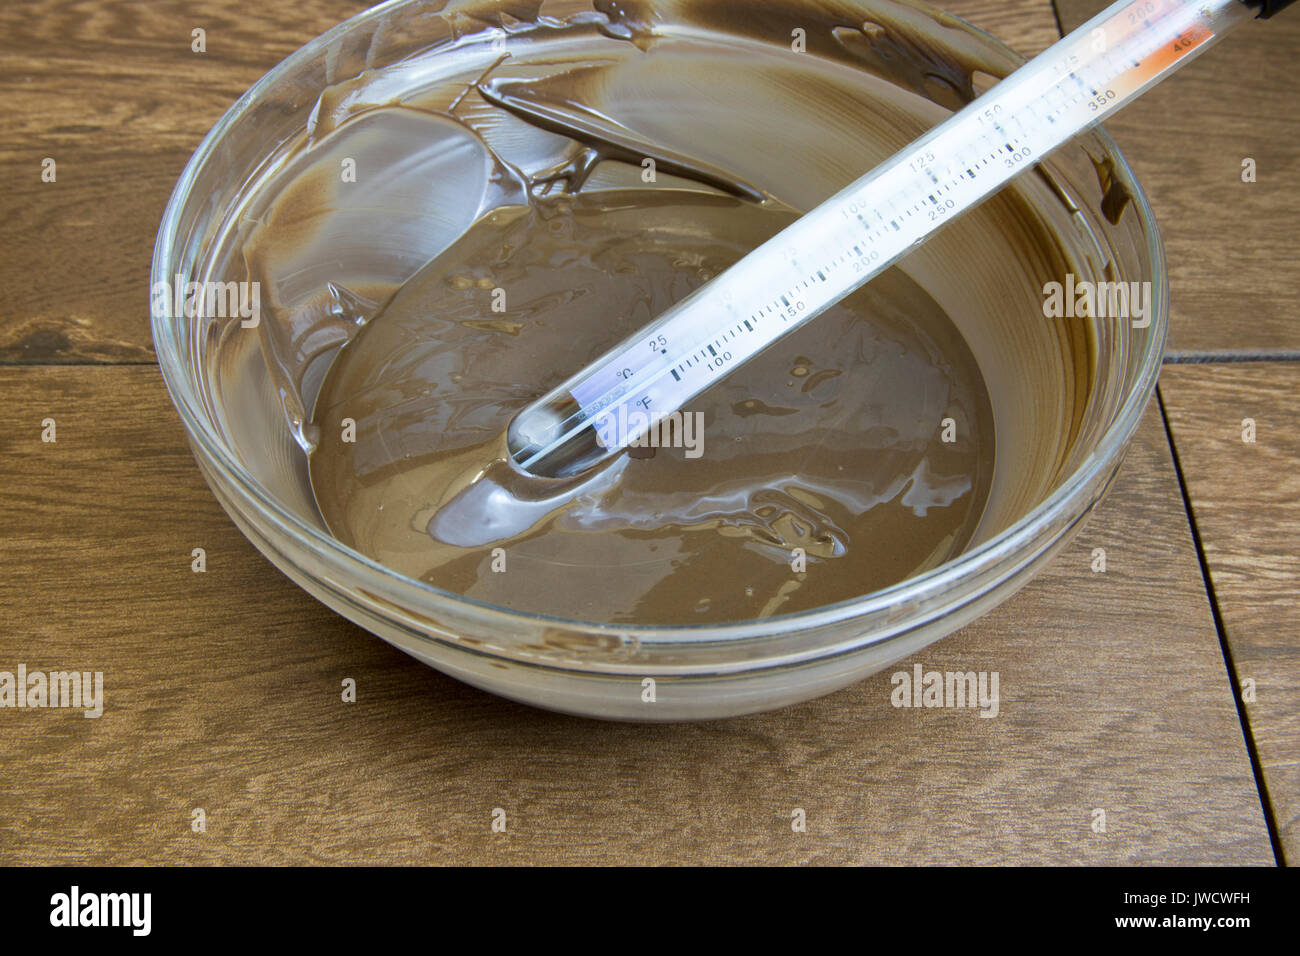 https://c8.alamy.com/comp/JWCWFH/glass-bowl-full-of-tempered-dark-chocolate-with-candy-thermometer-JWCWFH.jpg